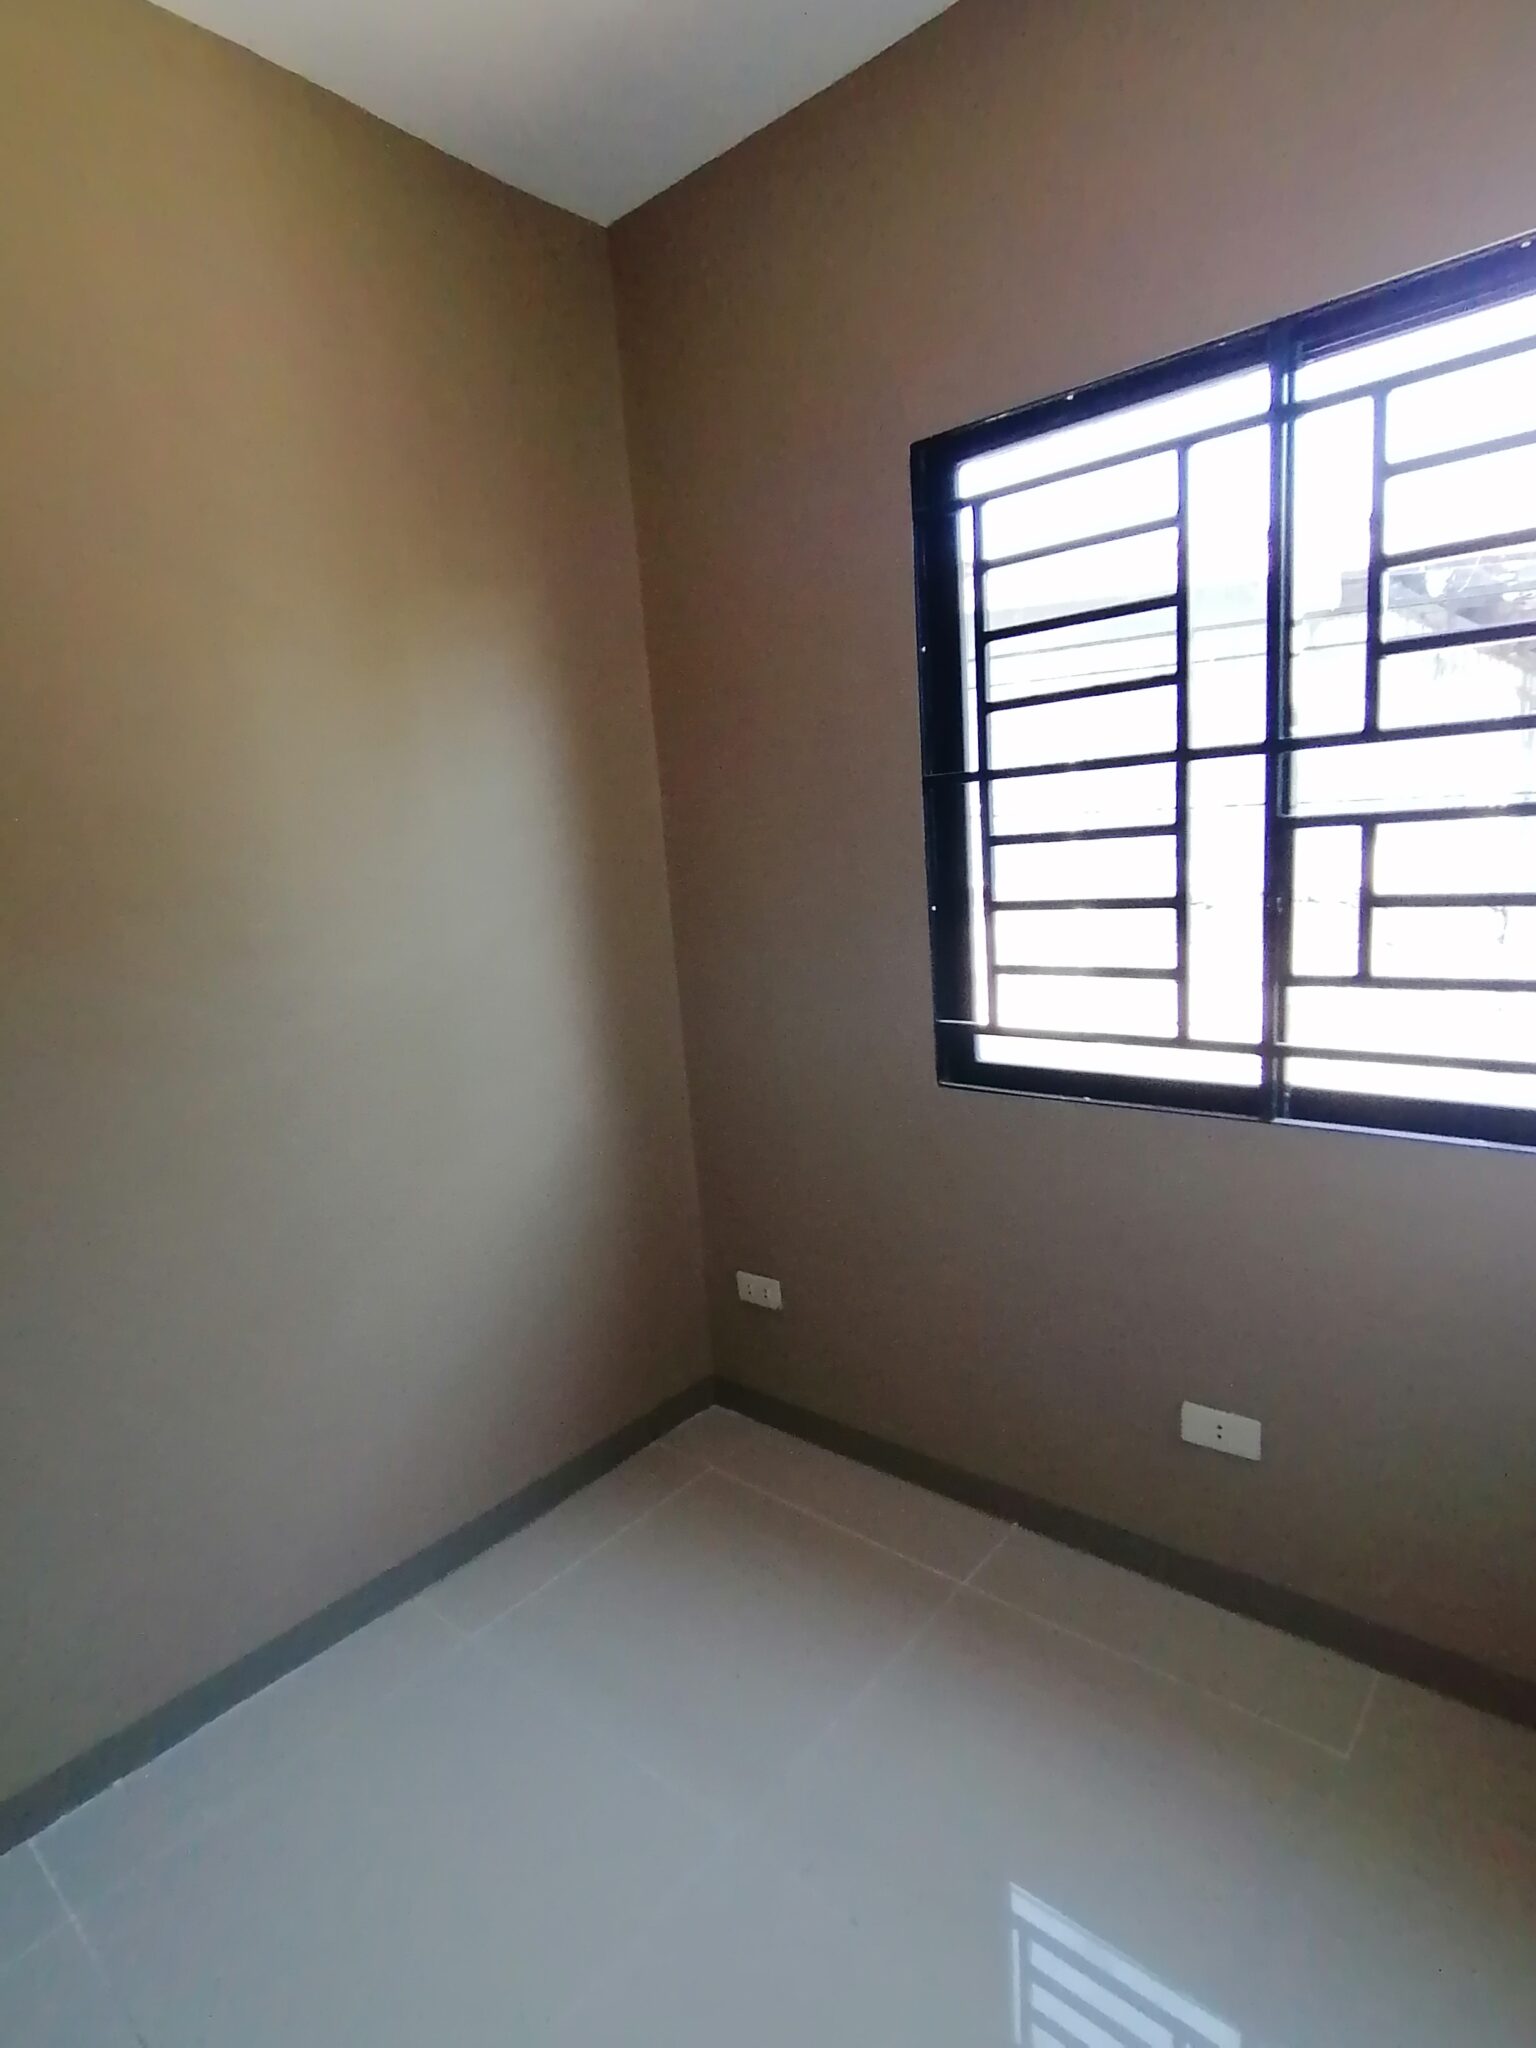 Private: Private: for rent townhouse in united paranaque subd 5 (ups5) sucat